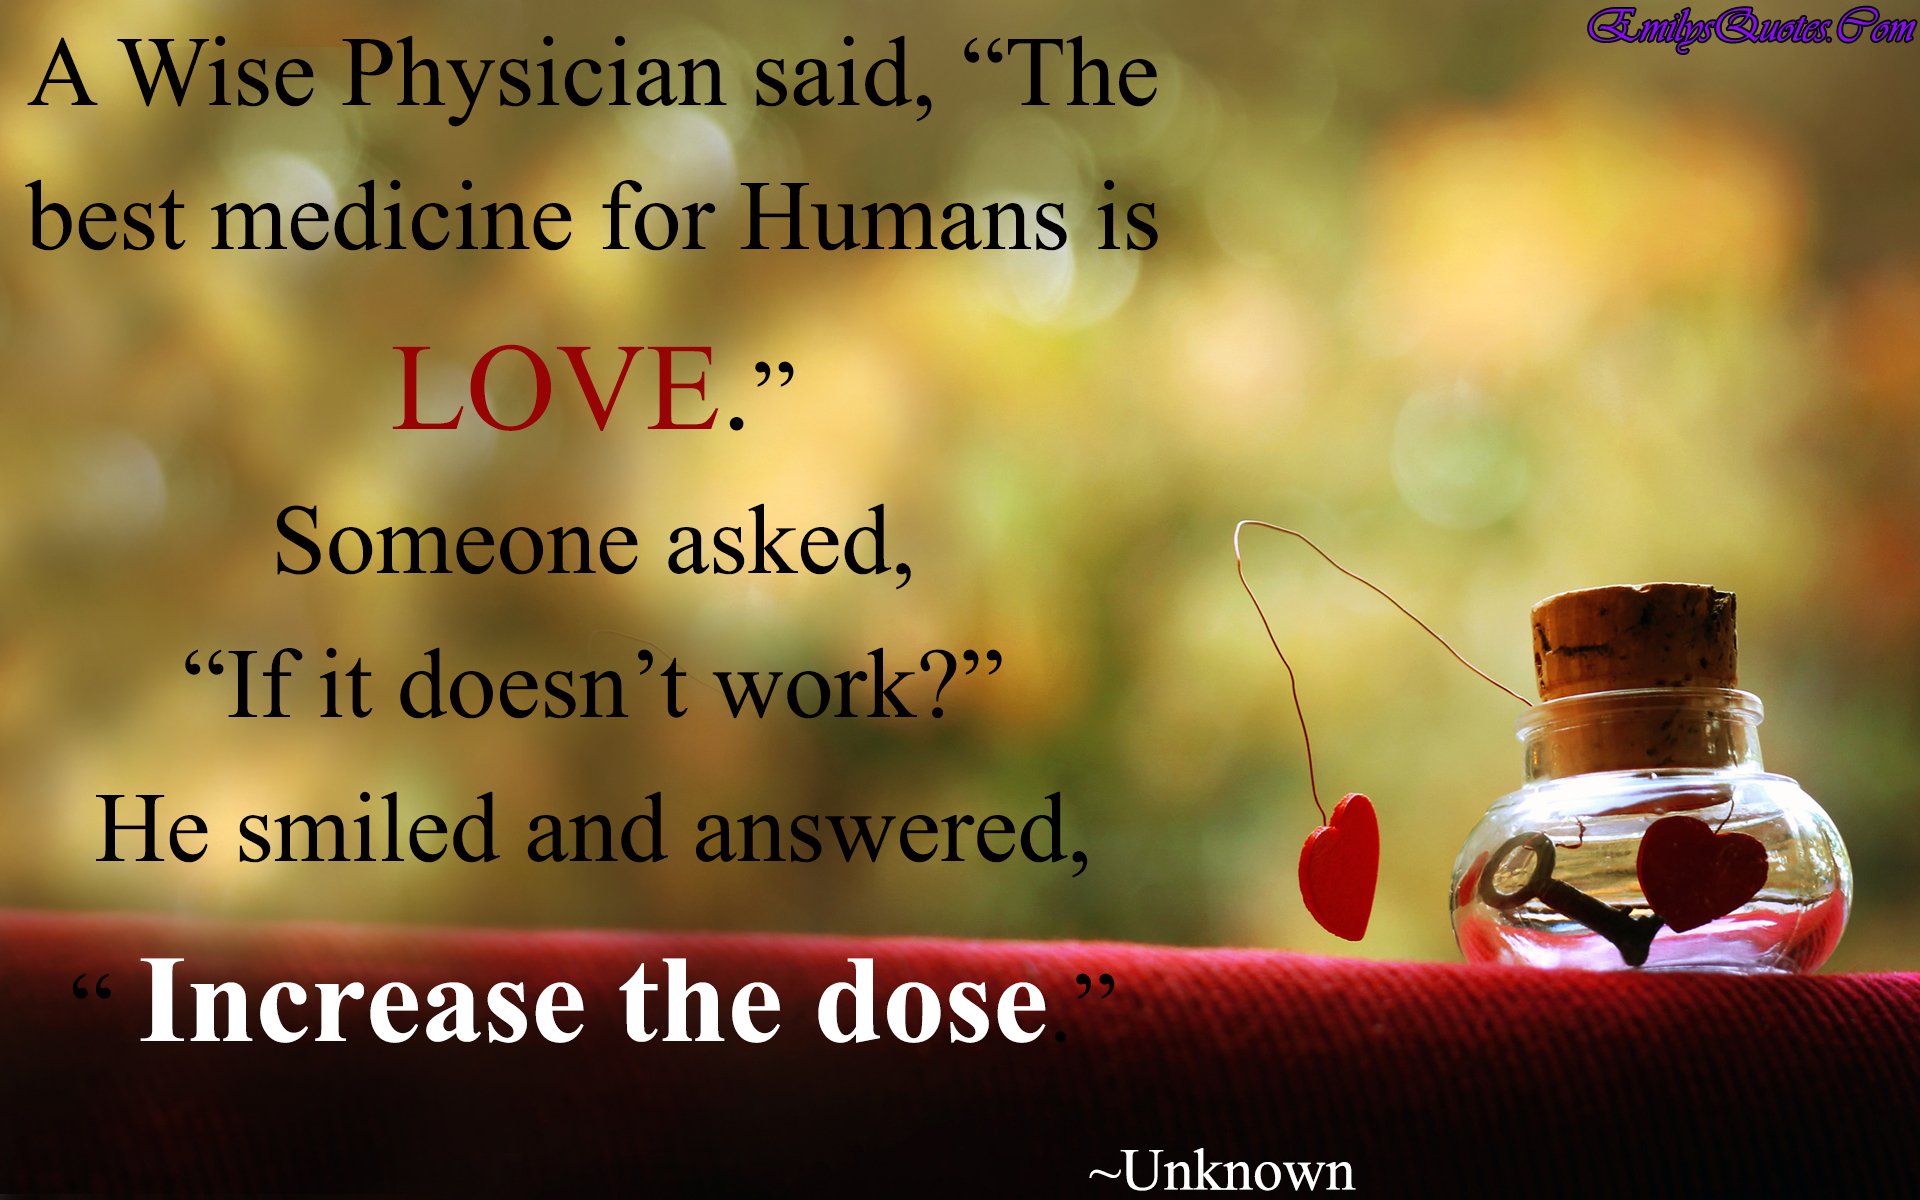 A Wise Physician Said The Best Medicine For Humans Is Love Images, Photos, Reviews